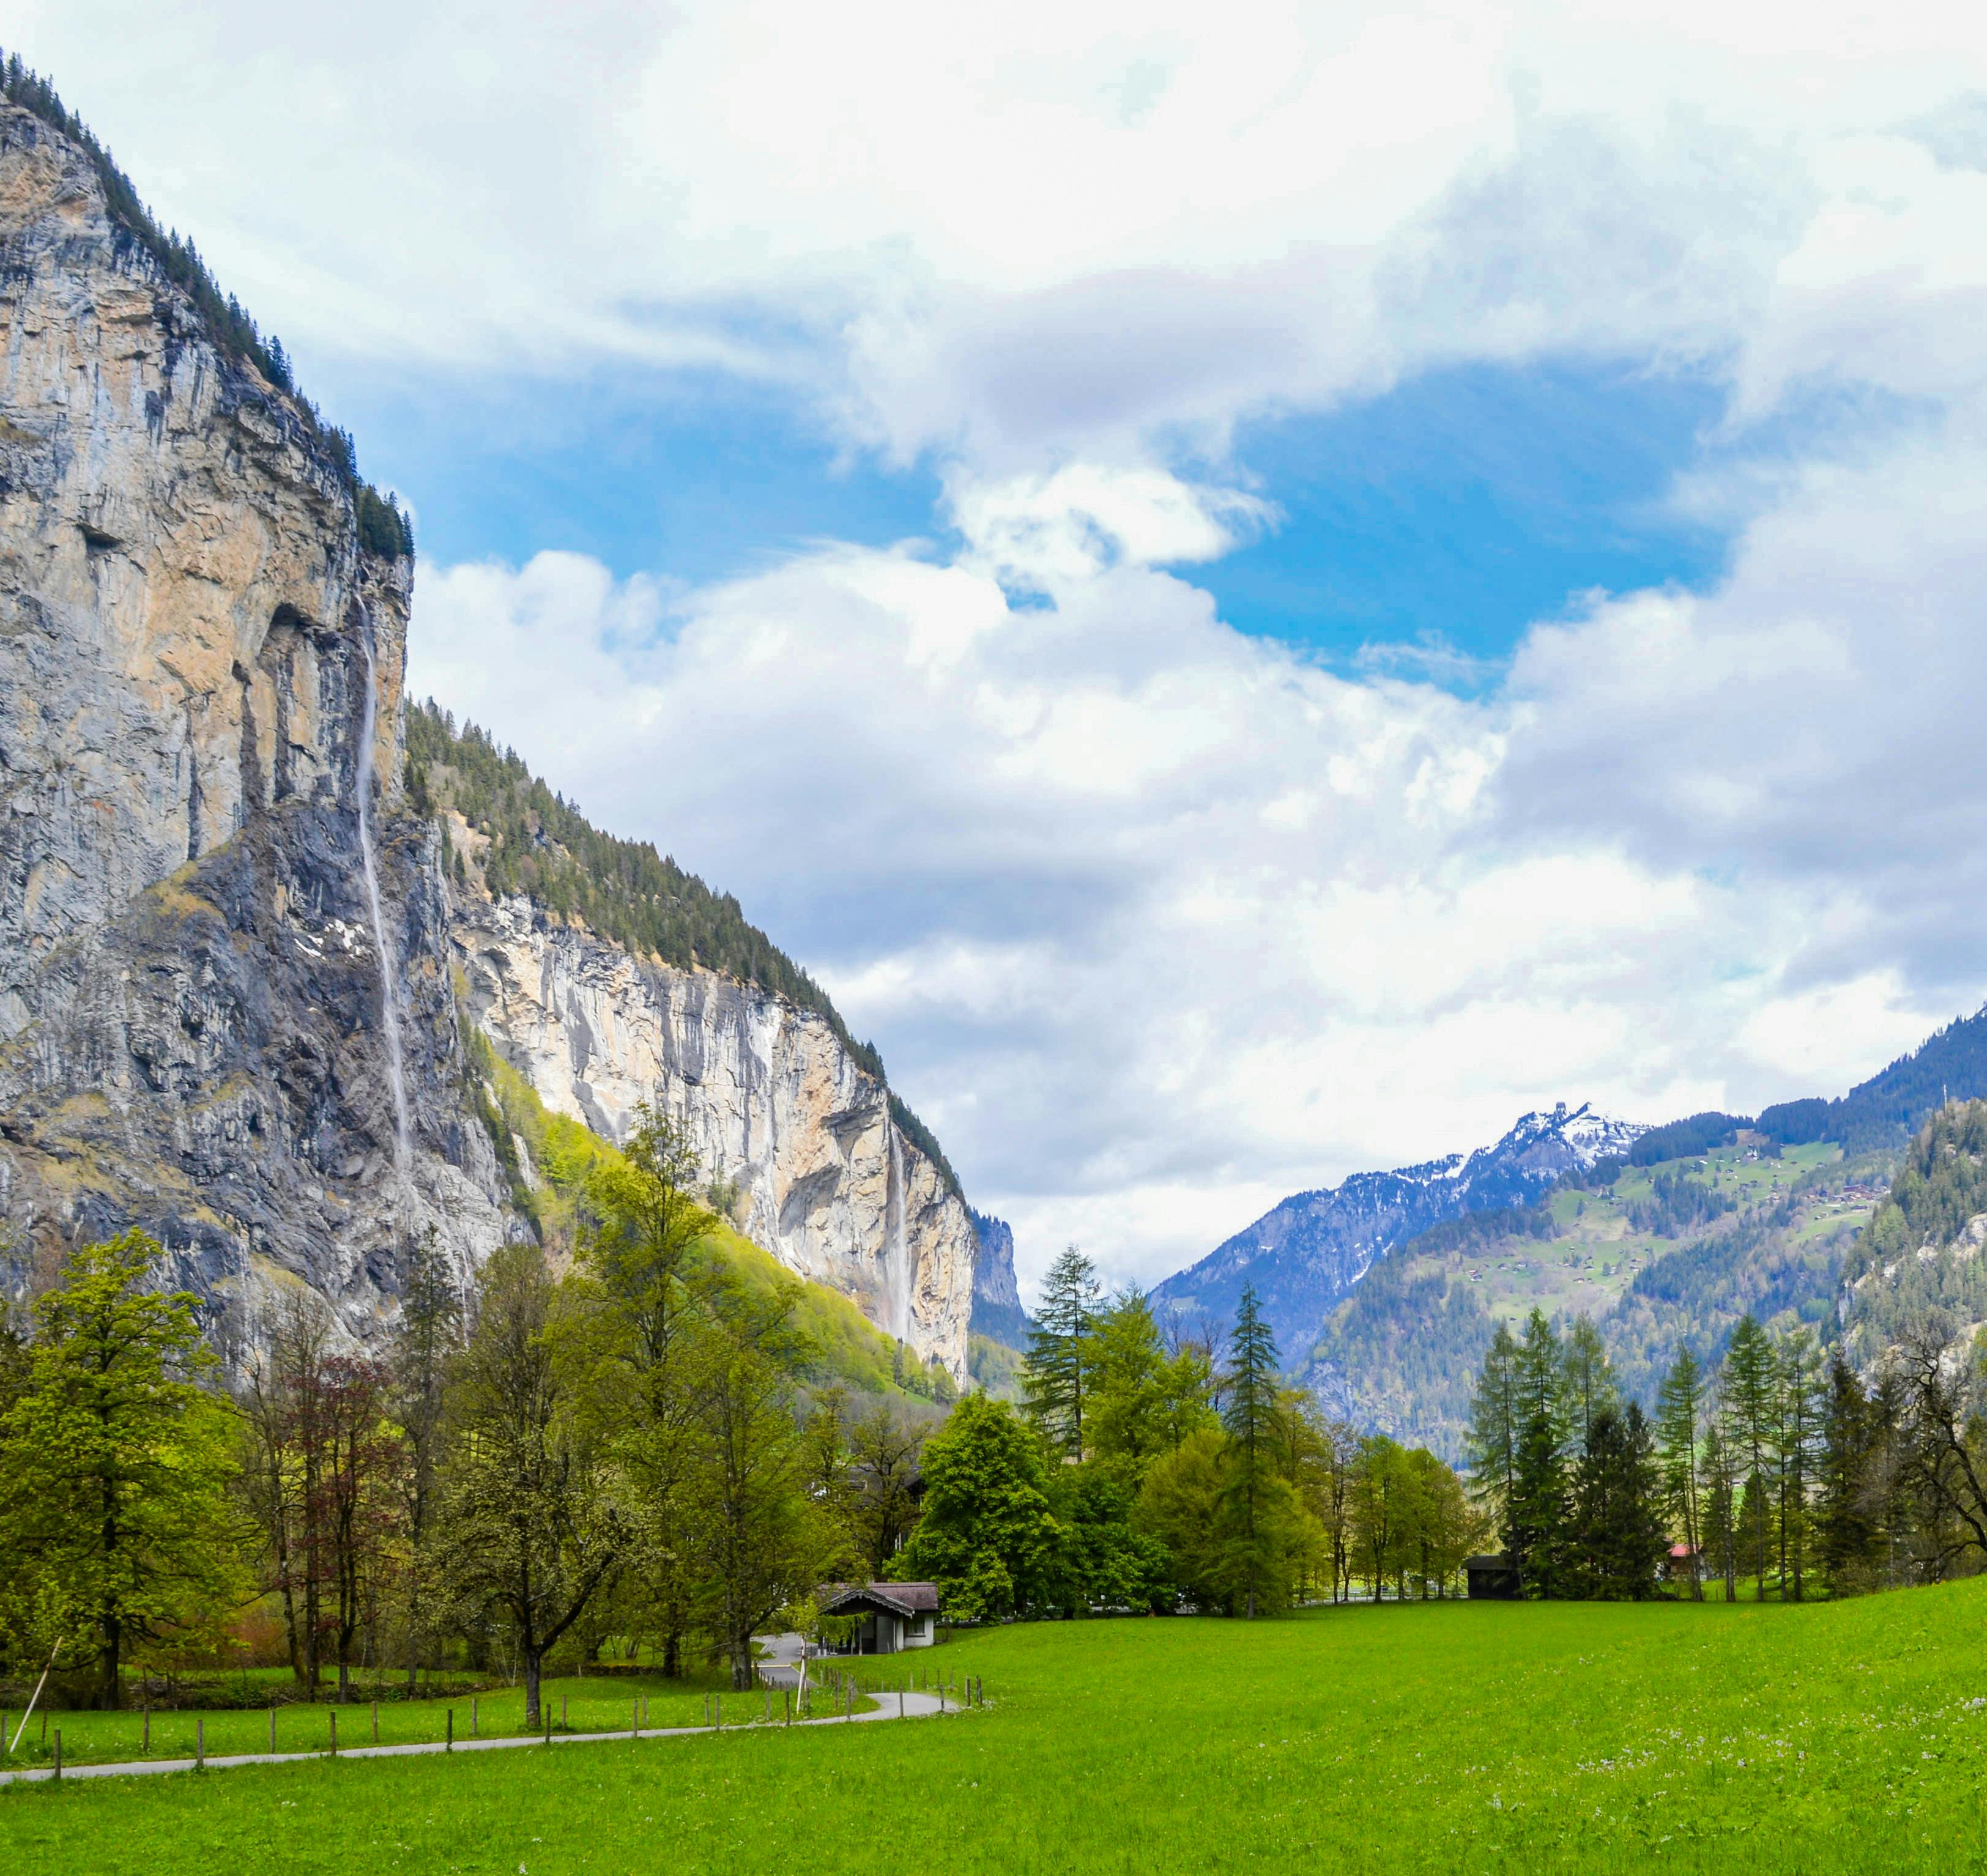 Milestone klippe balkon Green field with path and trees against cliffs · Free Stock Photo